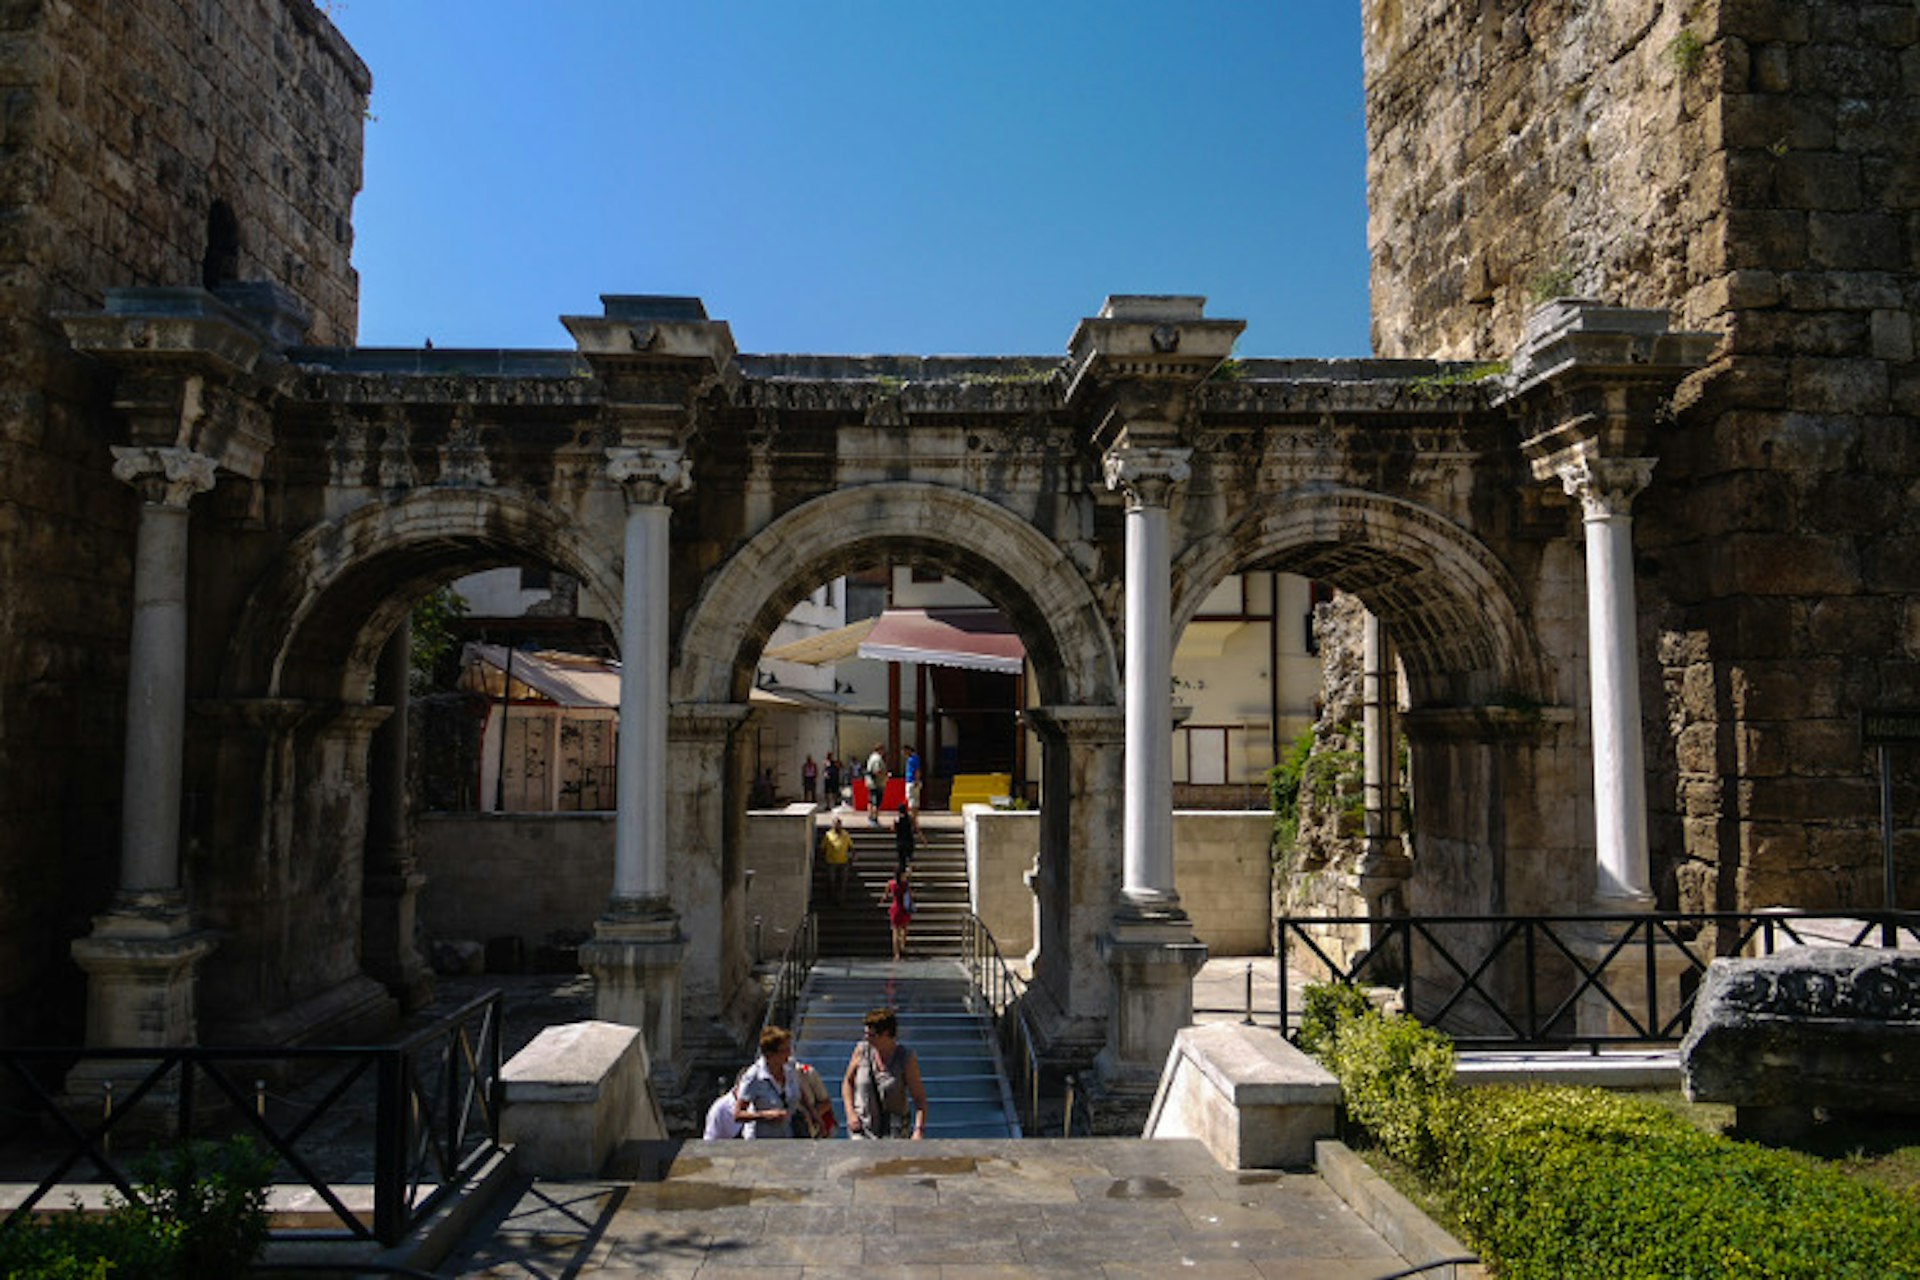 Hadrian's Gate, the entrance to Antalya's old town. Image by Forrestal_PL / CC BY-SA 2.0